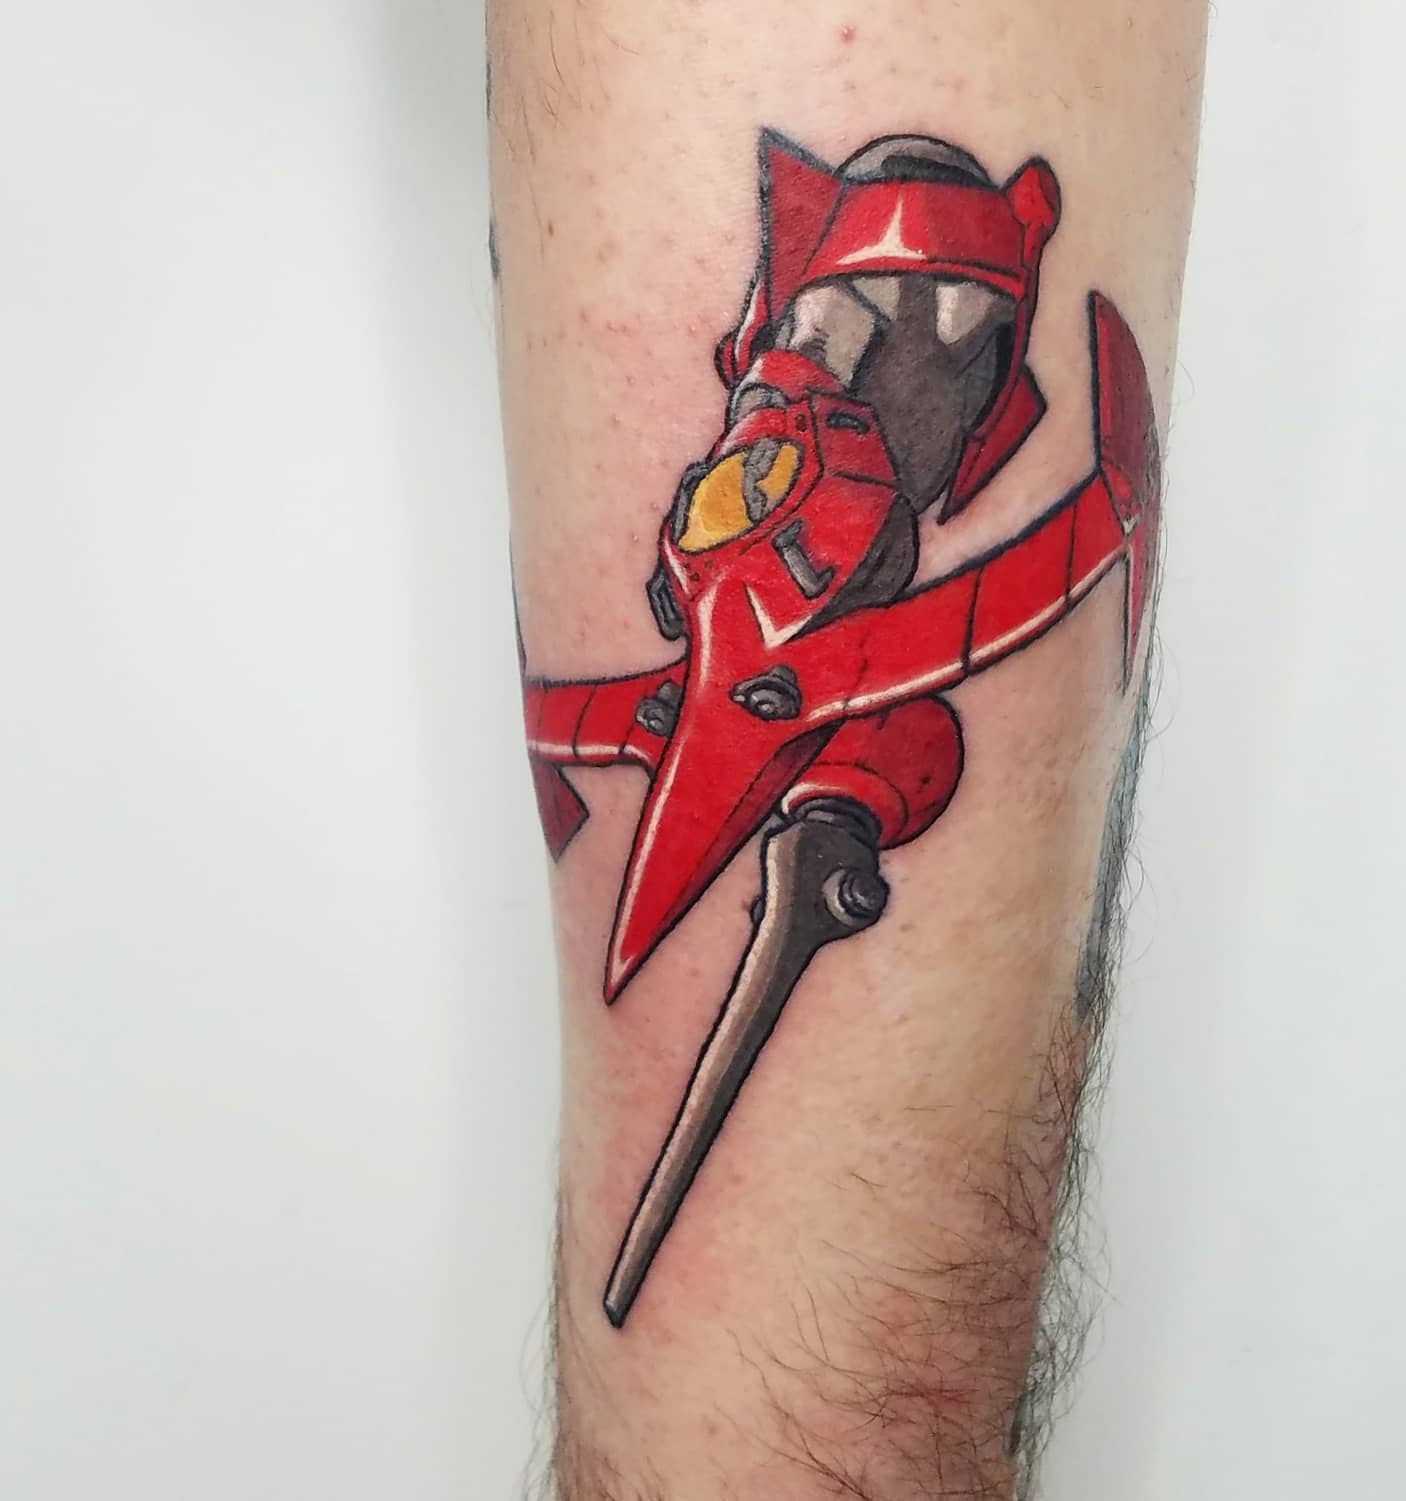 New tattoo Spikes ship from Cowboy Bebop The